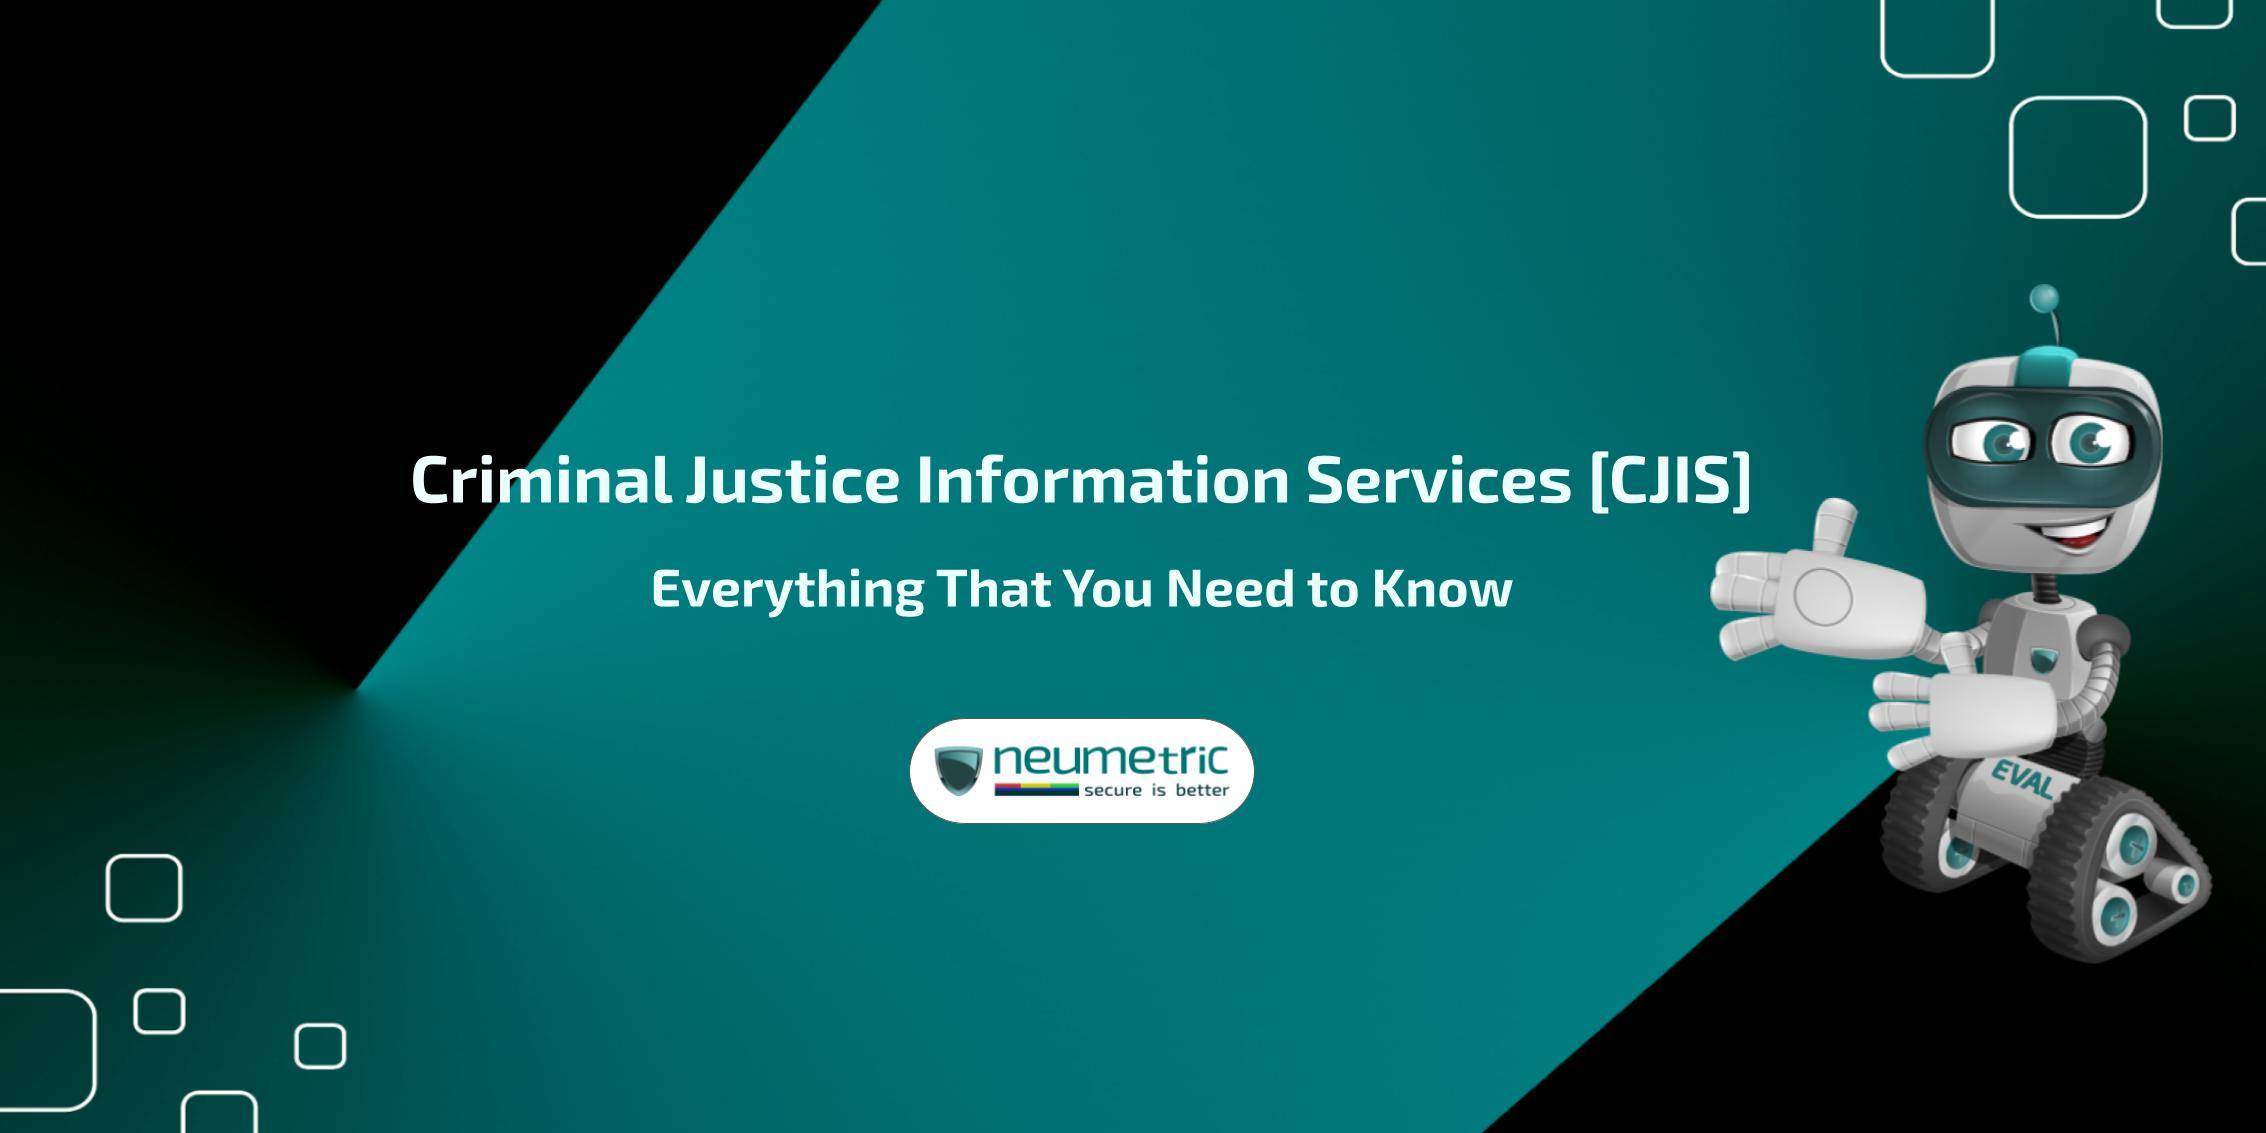 Criminal Justice Information Services [CJIS]: Everything That You Need to Know